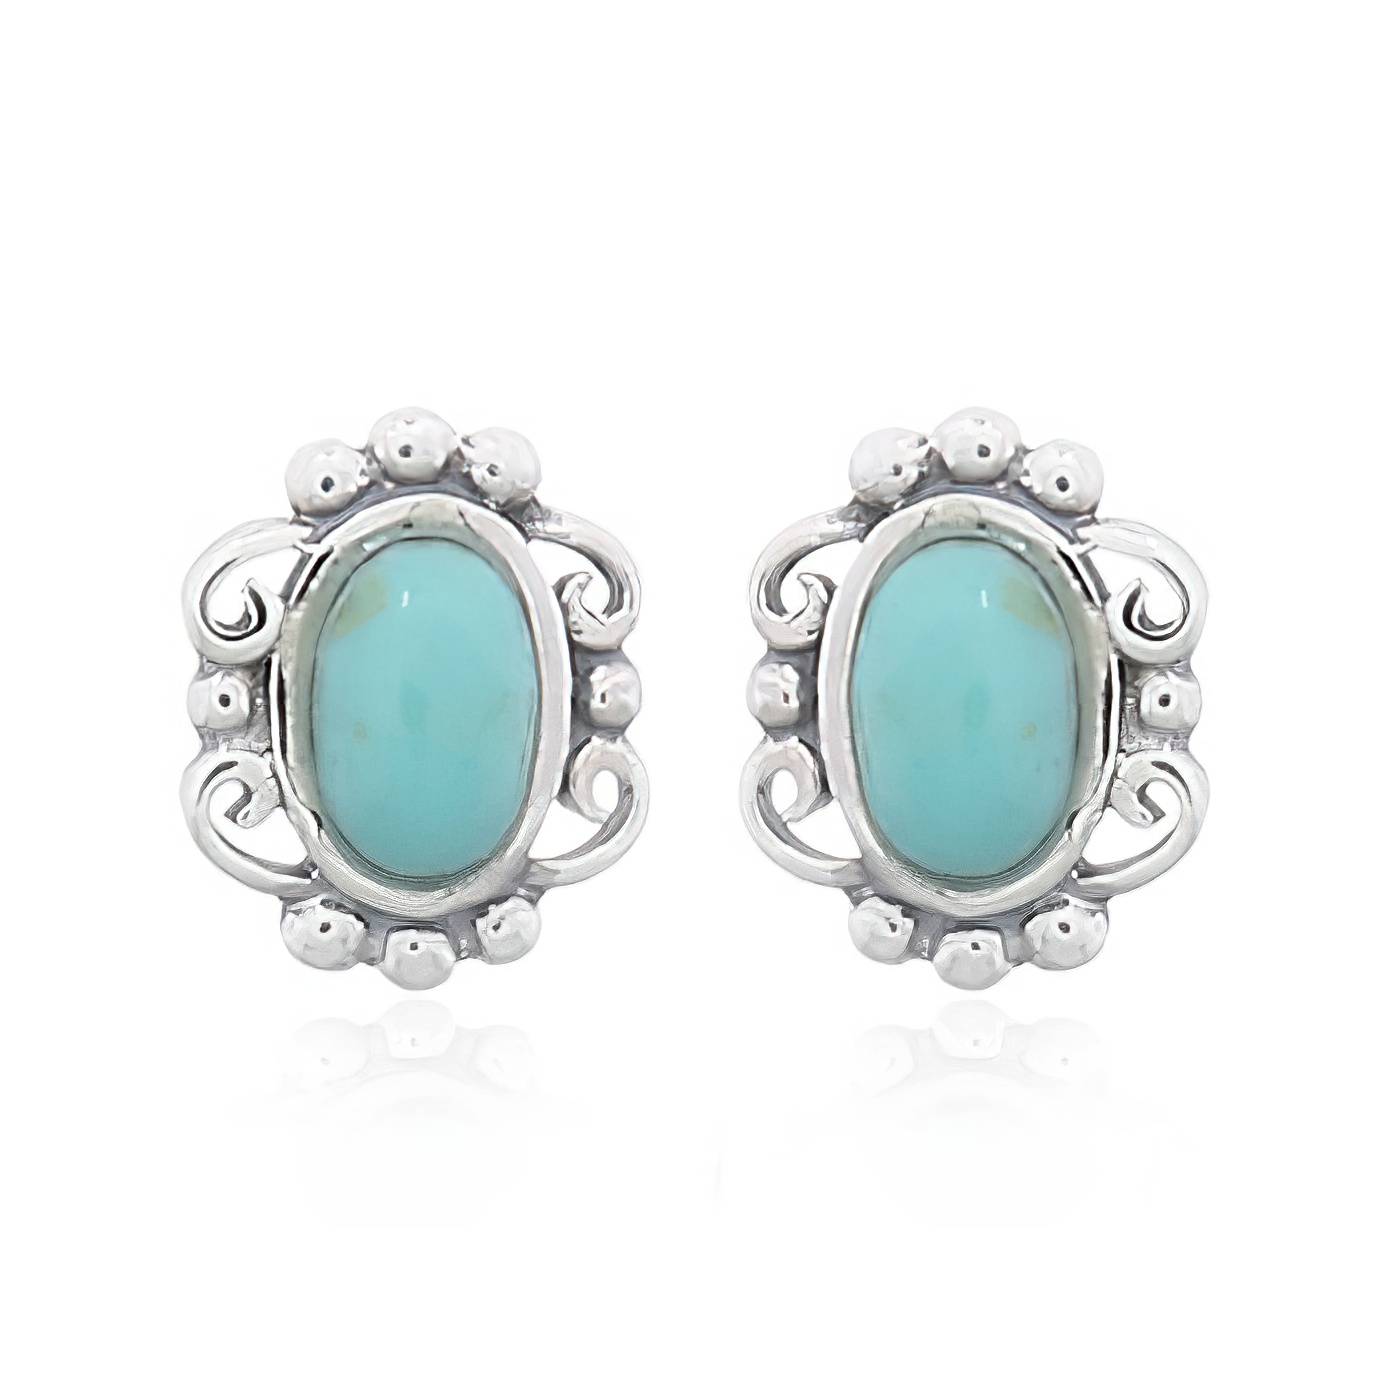 Reconstituted Stone Green Oval Filigree Silver Stud Earrings by BeYindi 